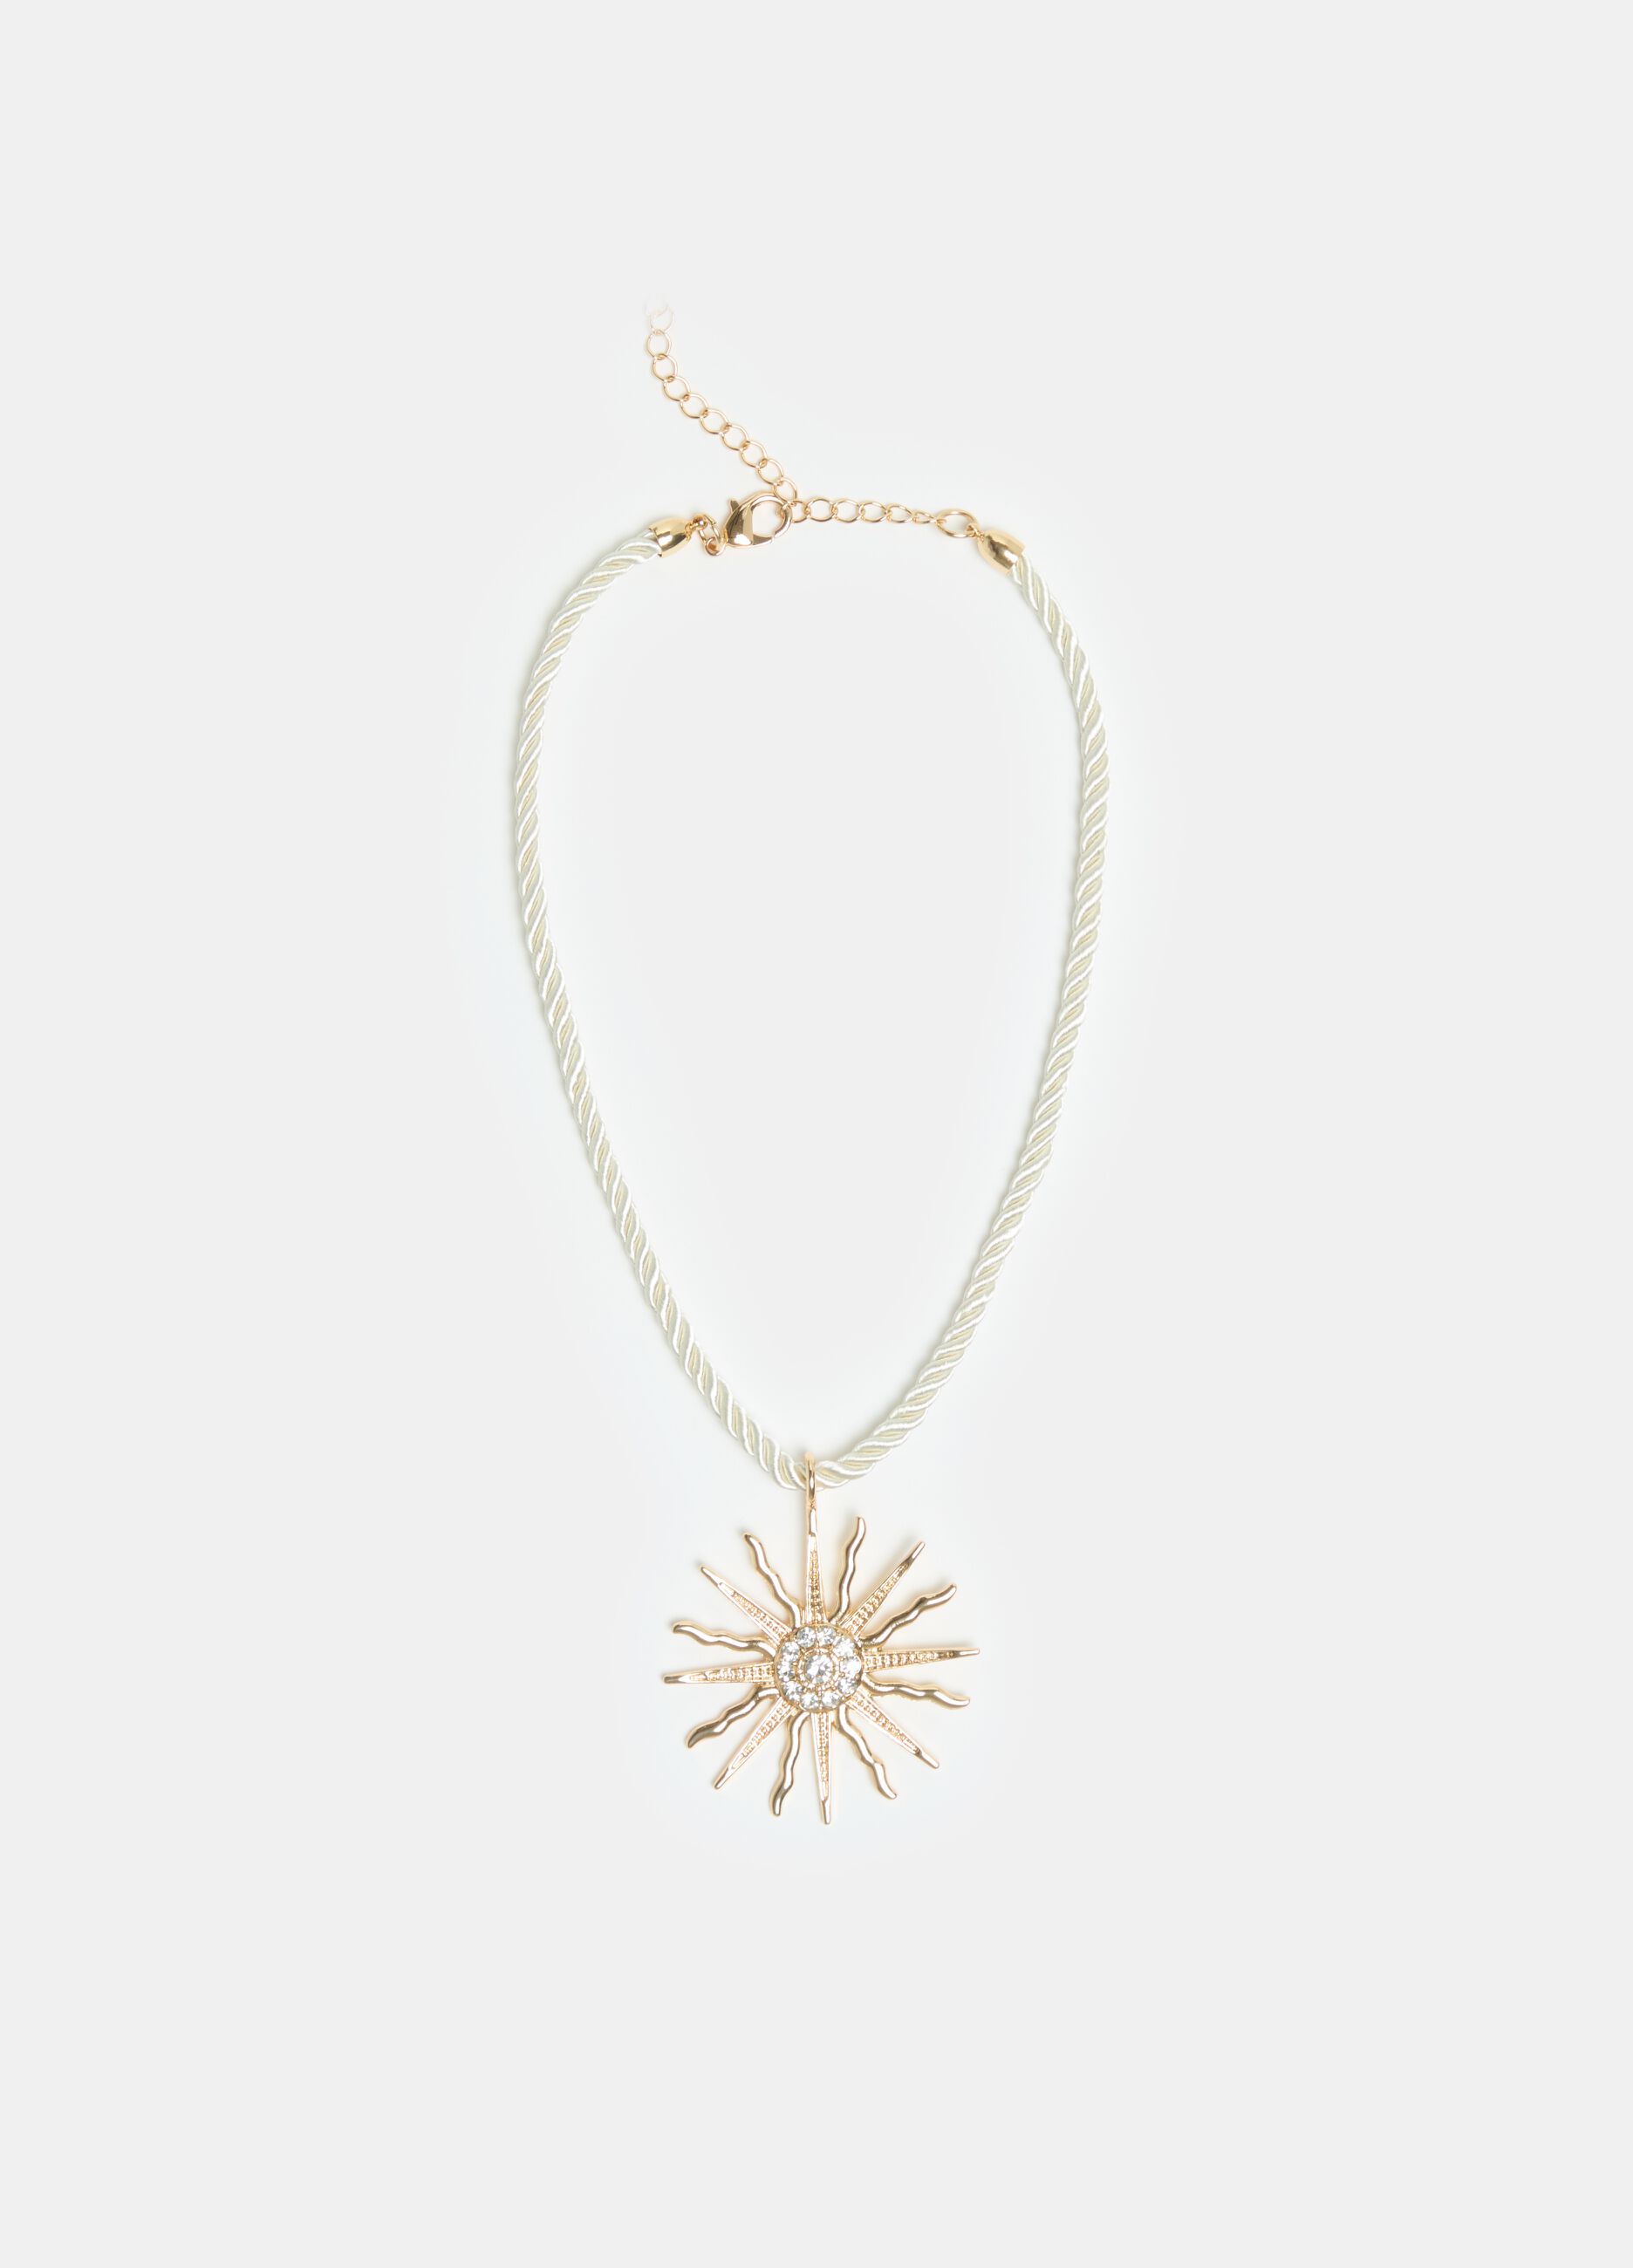 Necklace with sun pendant